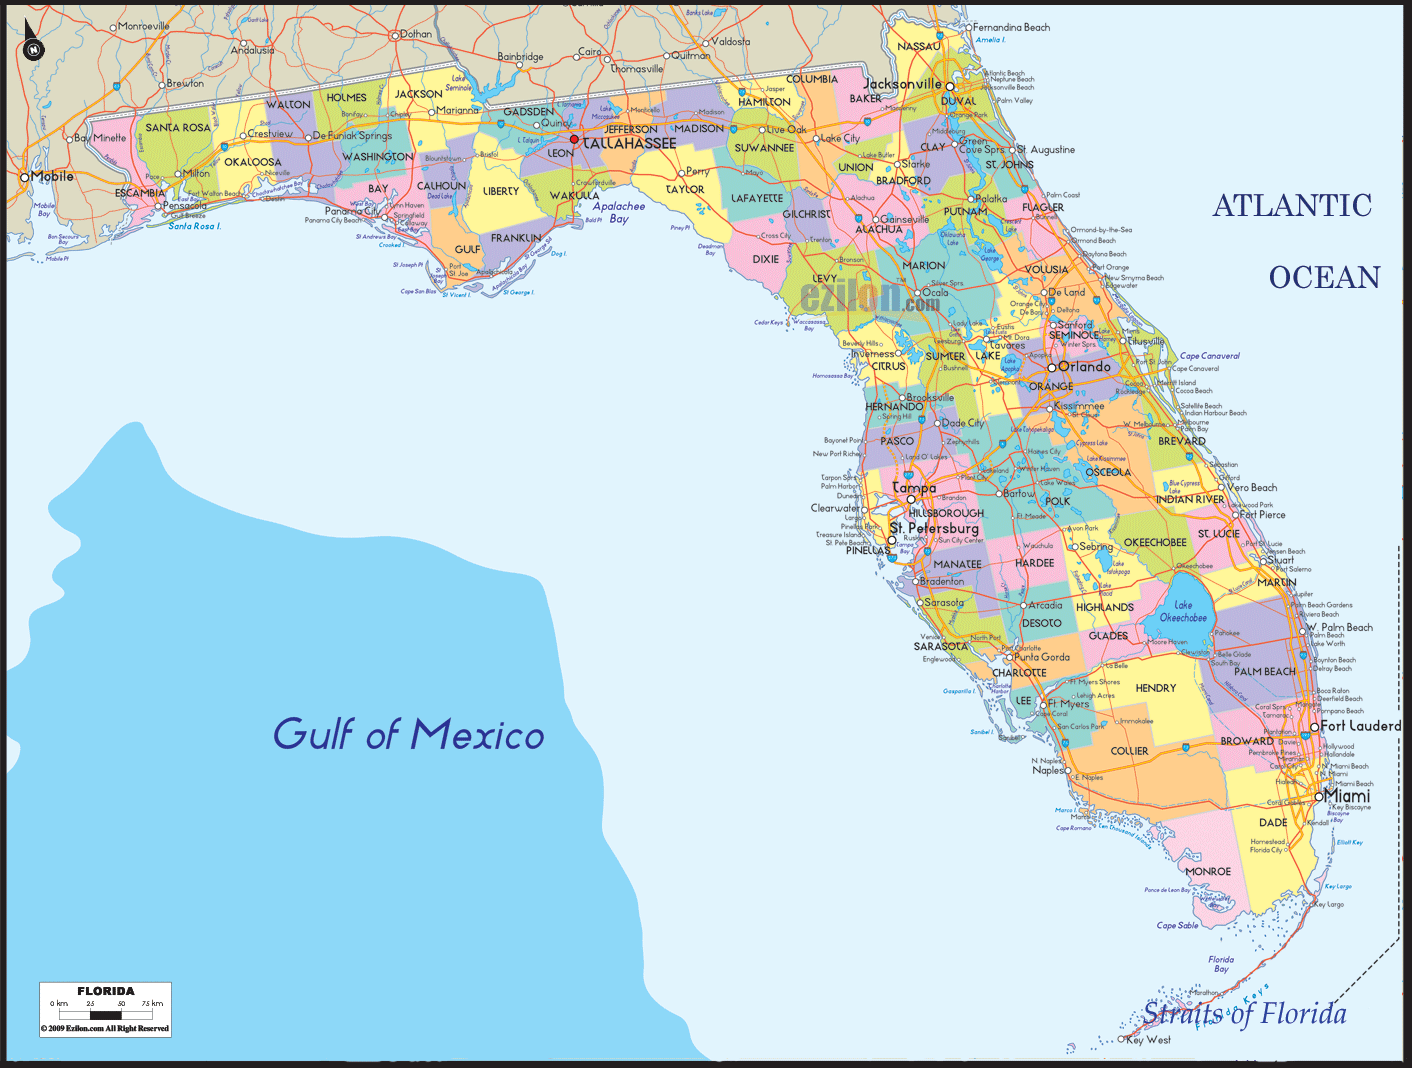 Florida Counties and Road Map